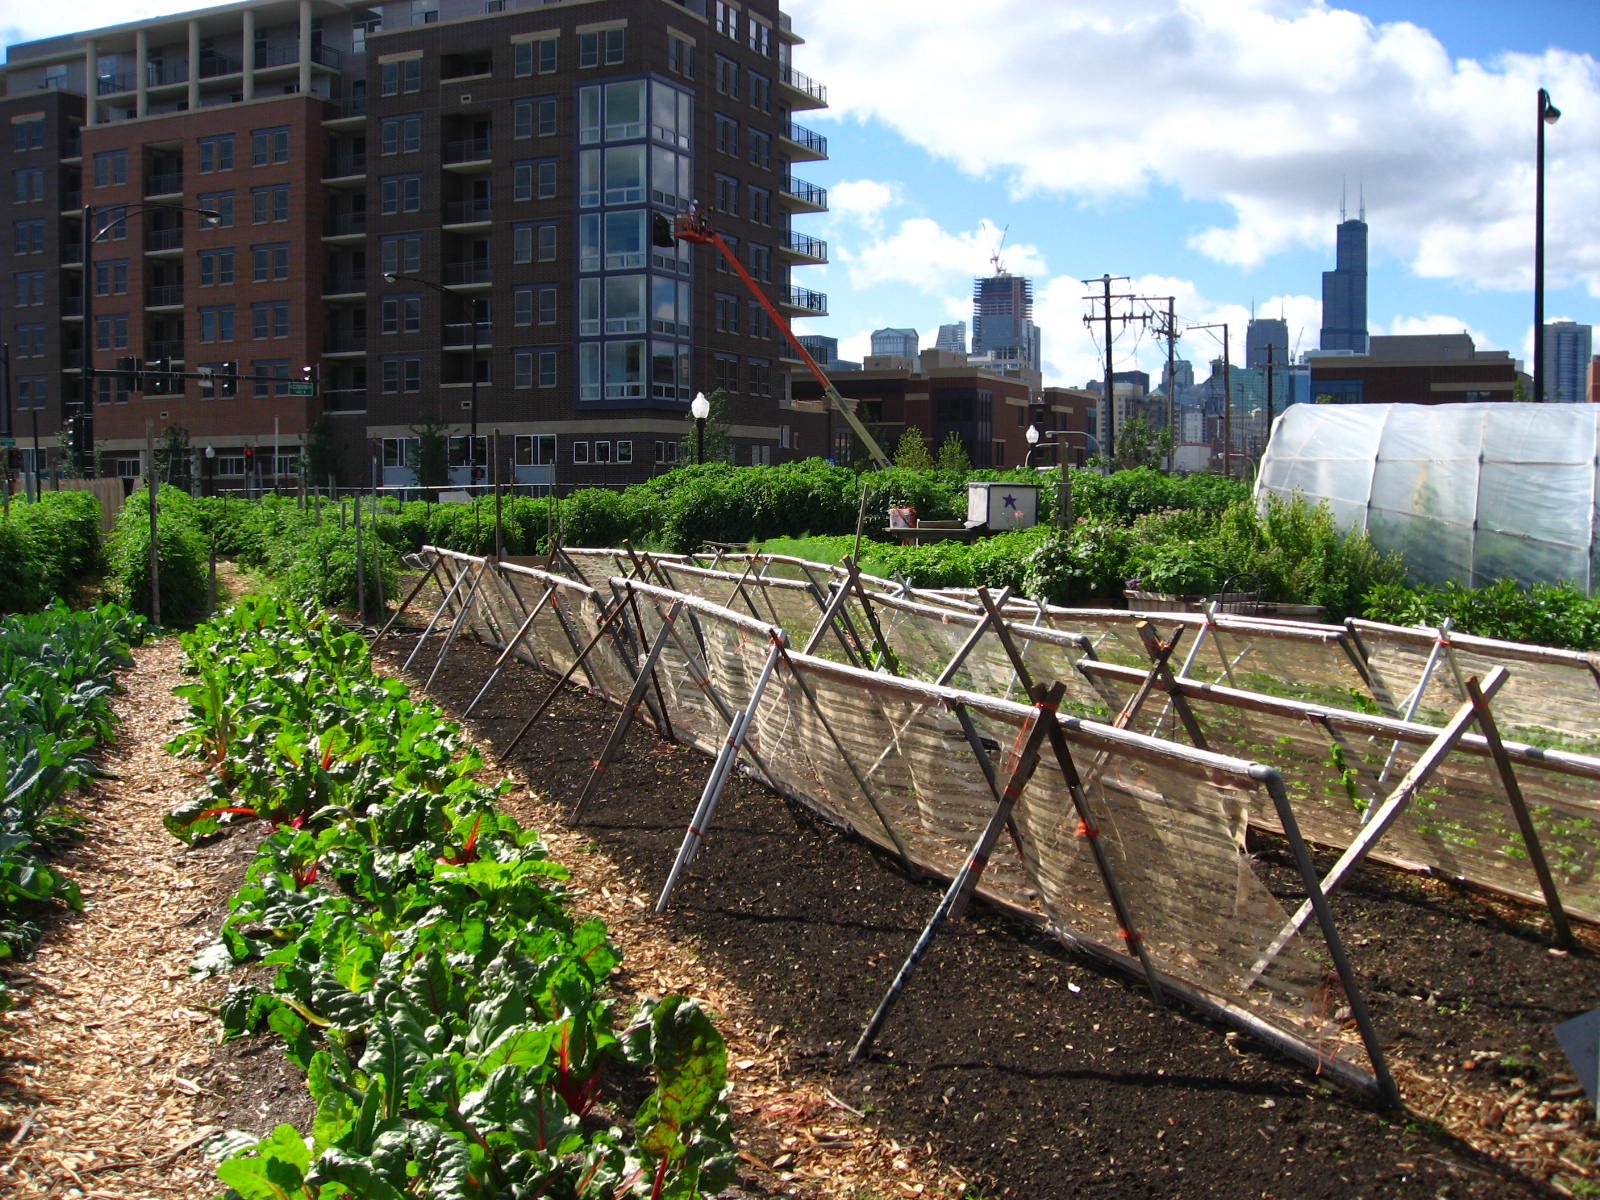 A 1.5-acre parcel of land owned by the City of Chicago and provided to an urban farming initiative.